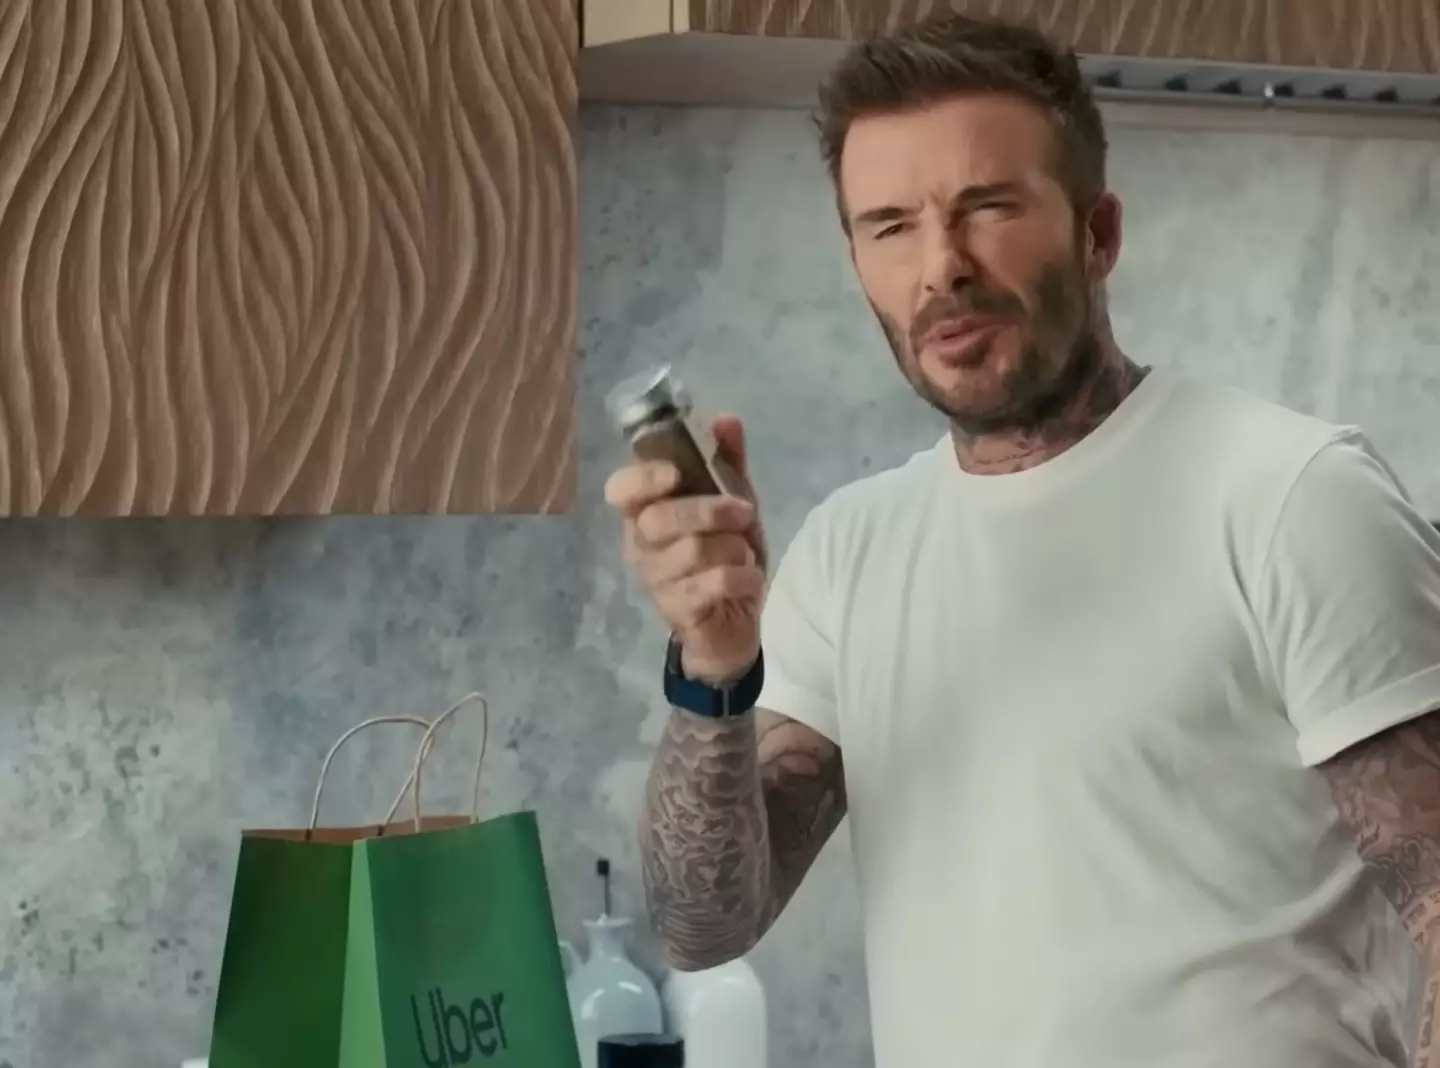 The advert features celebs like David Beckham forgetting important details.